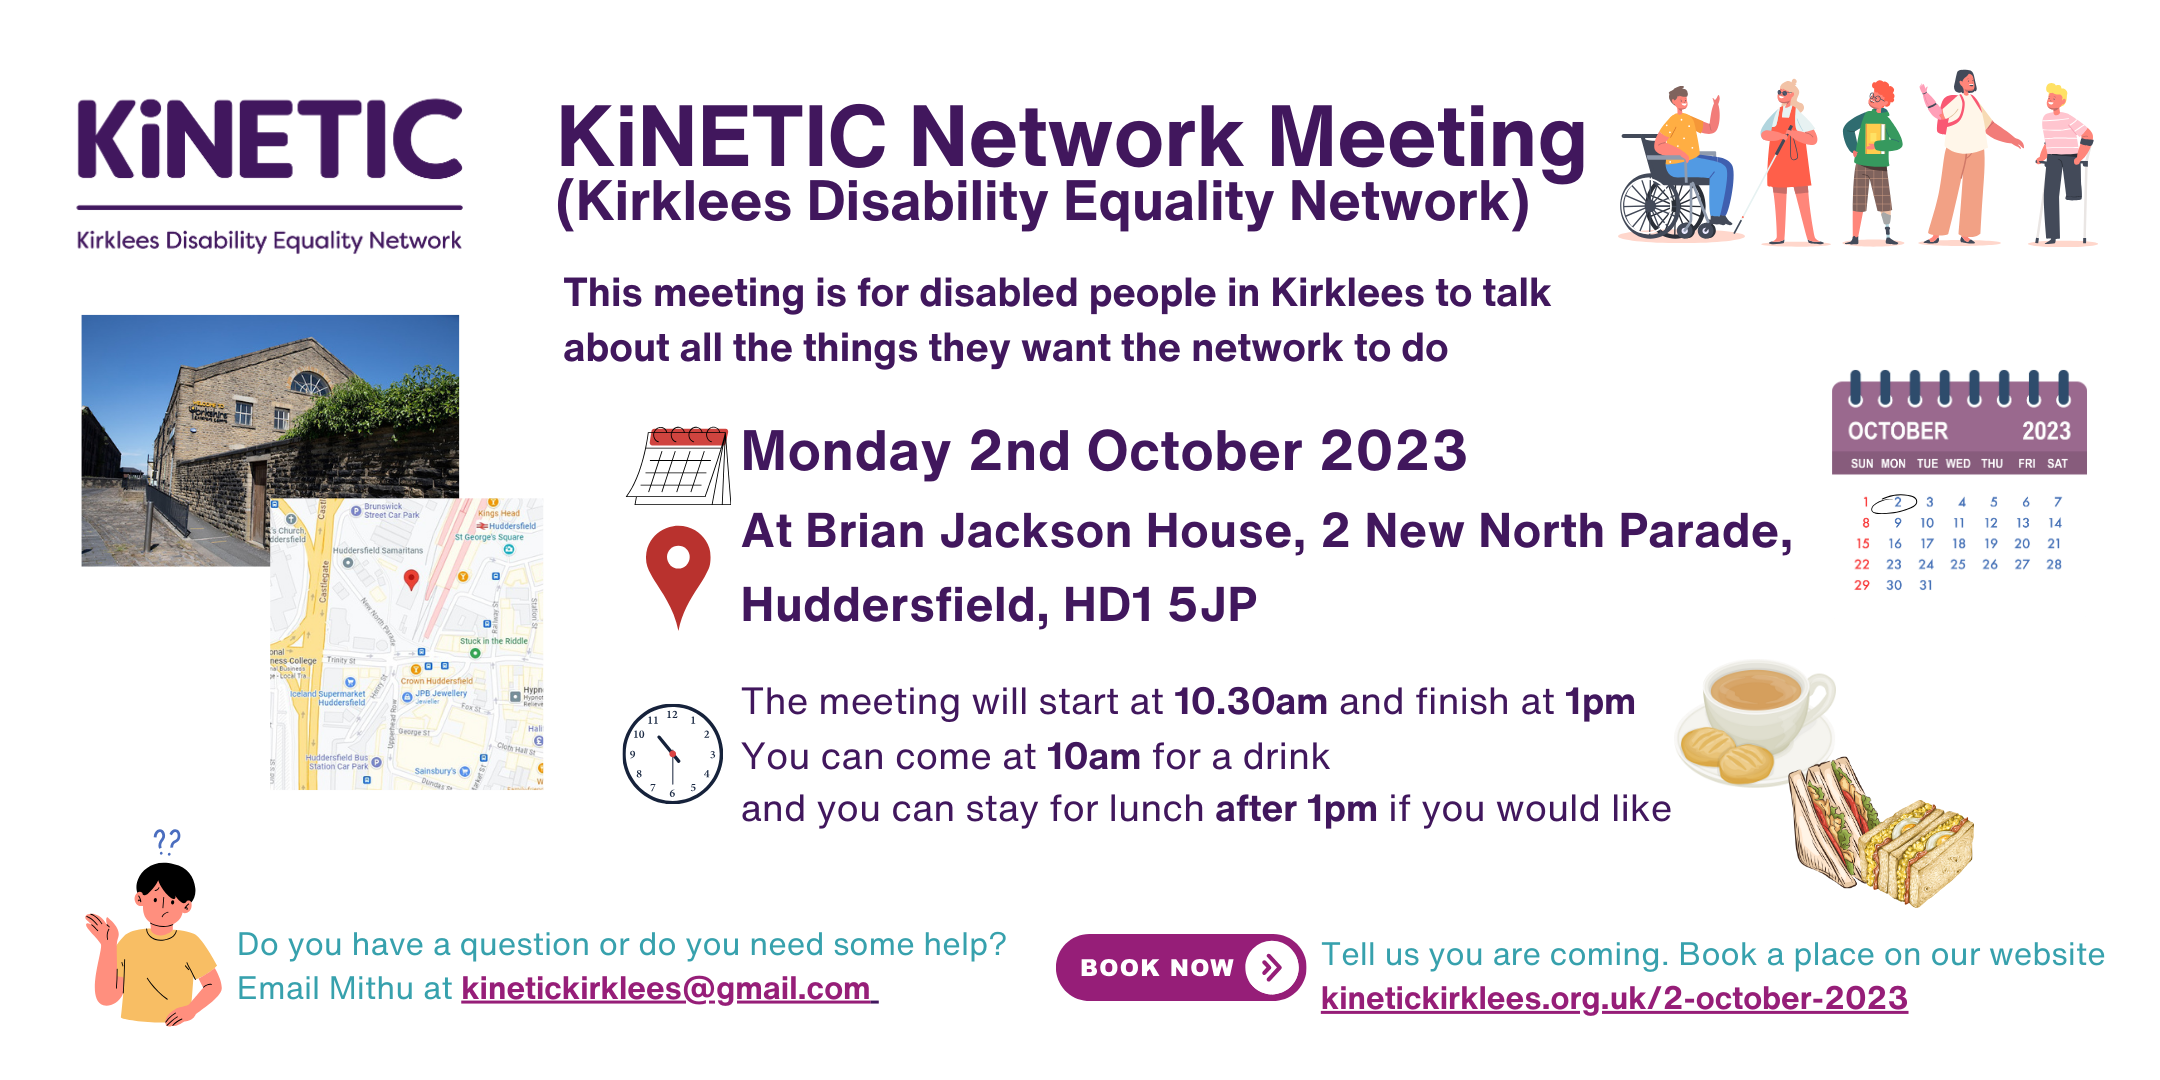 KiNETIC Network Meeting – Monday 2nd October 2023